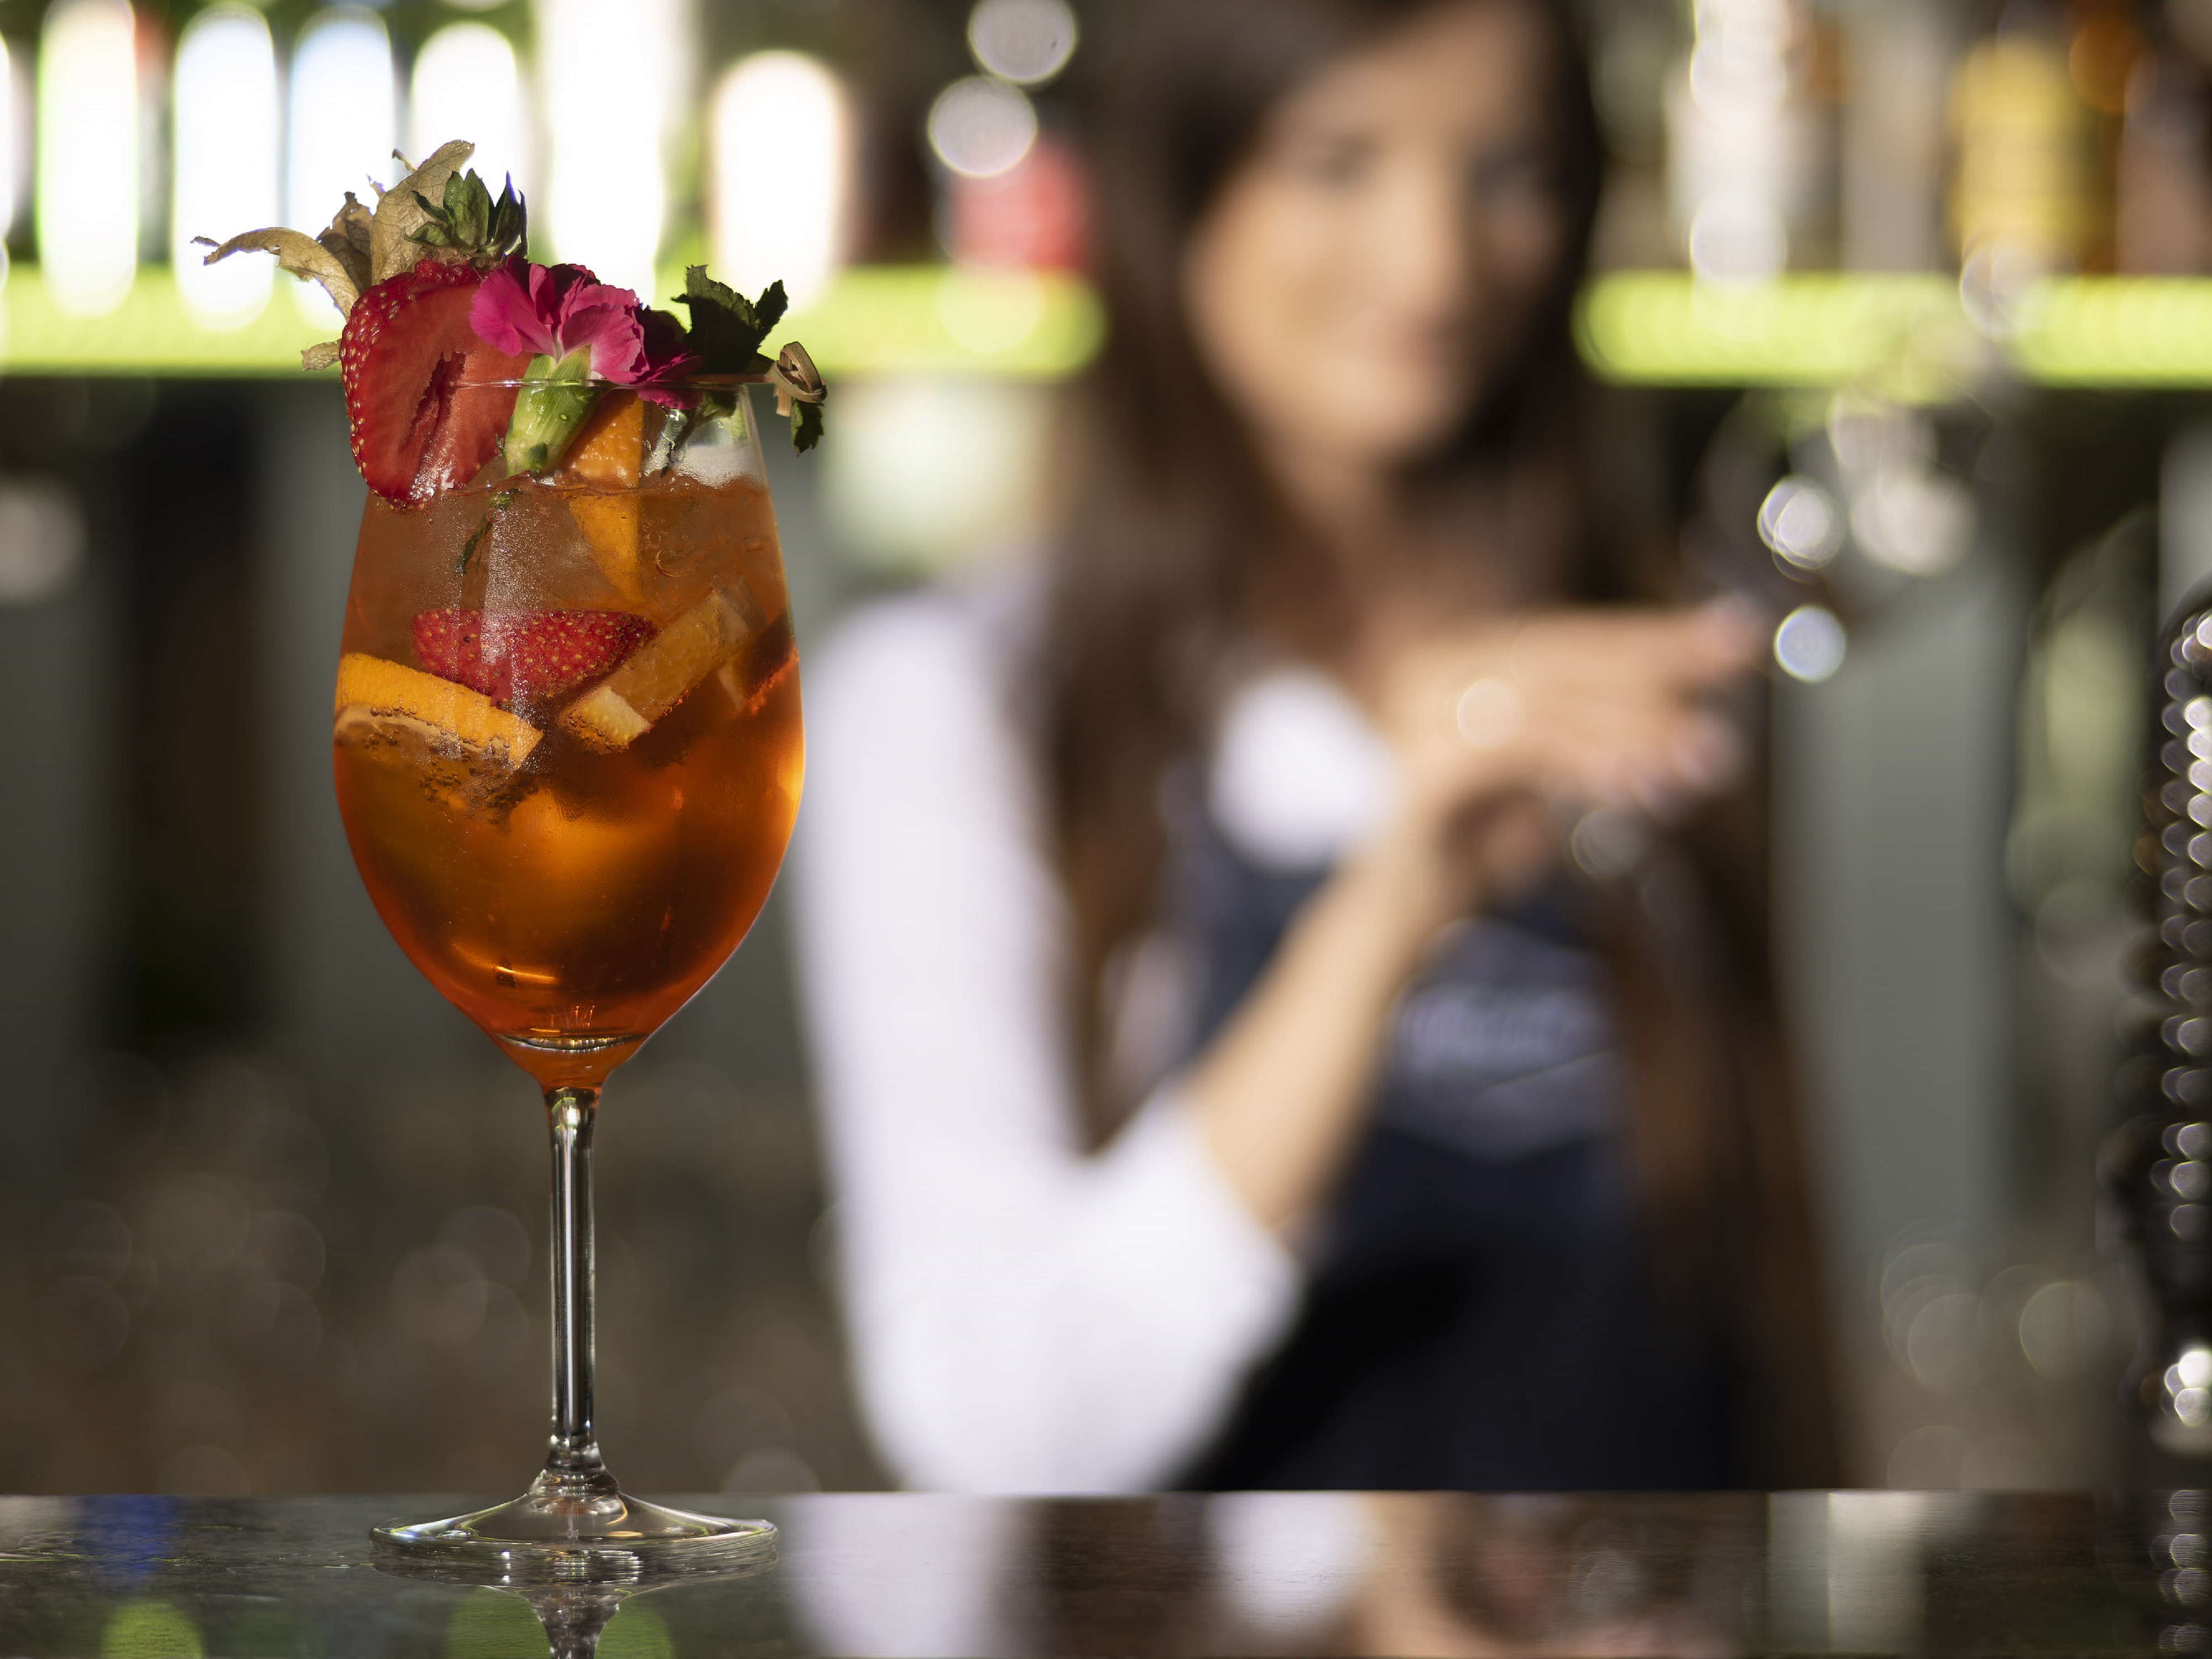 Woman Enjoying a Drink with Fruits at a Bar